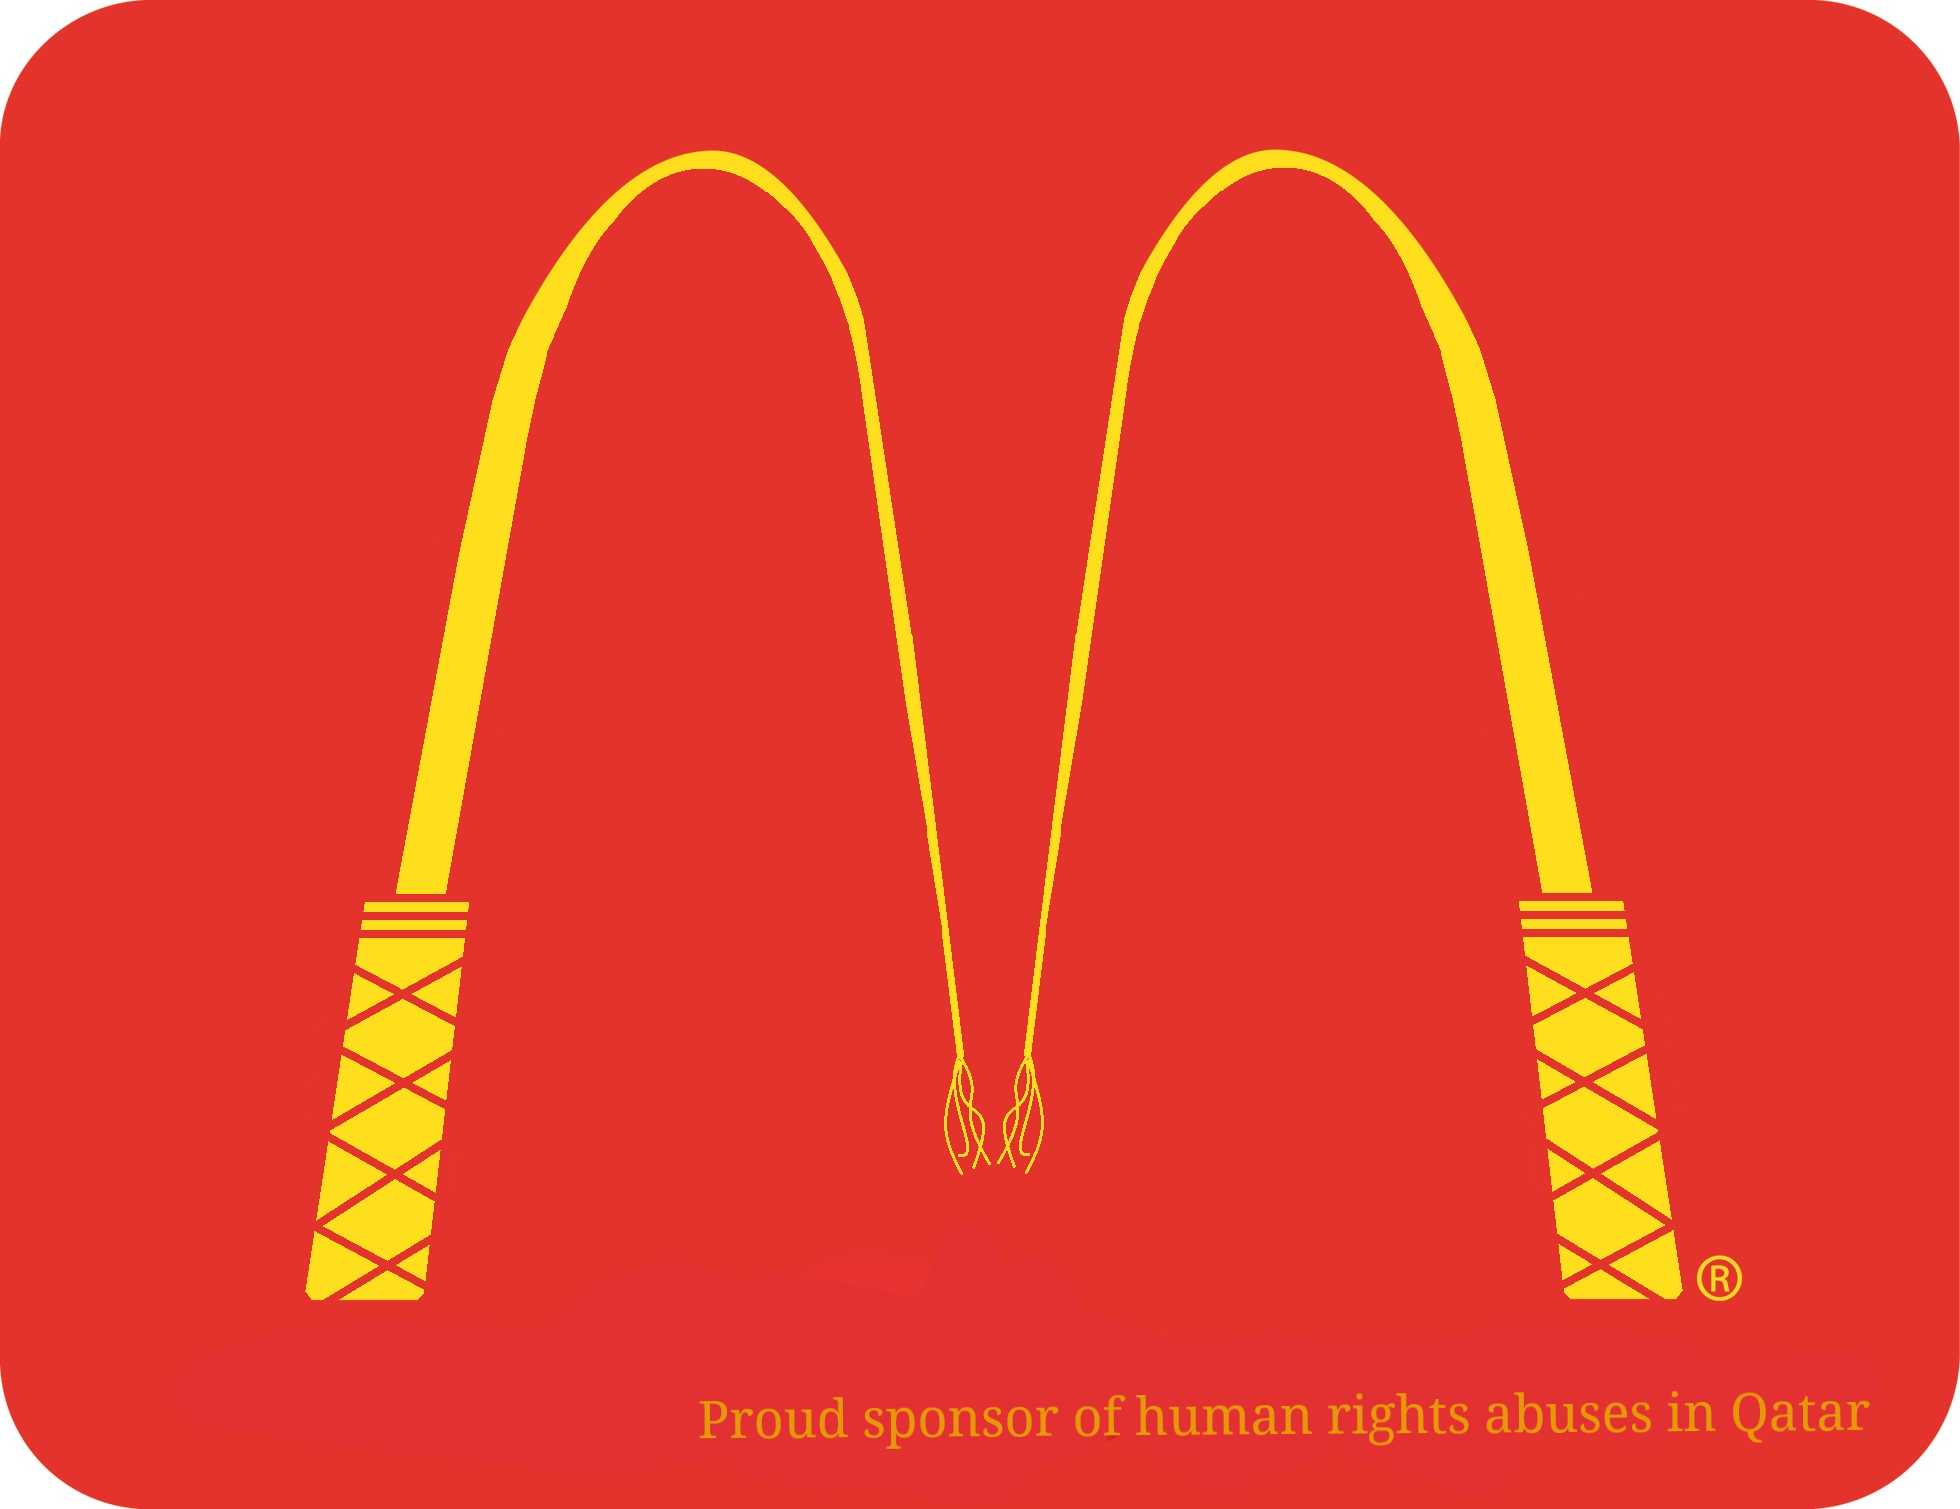 McDonalds, proud sponsor of human rights abuses in Qatar